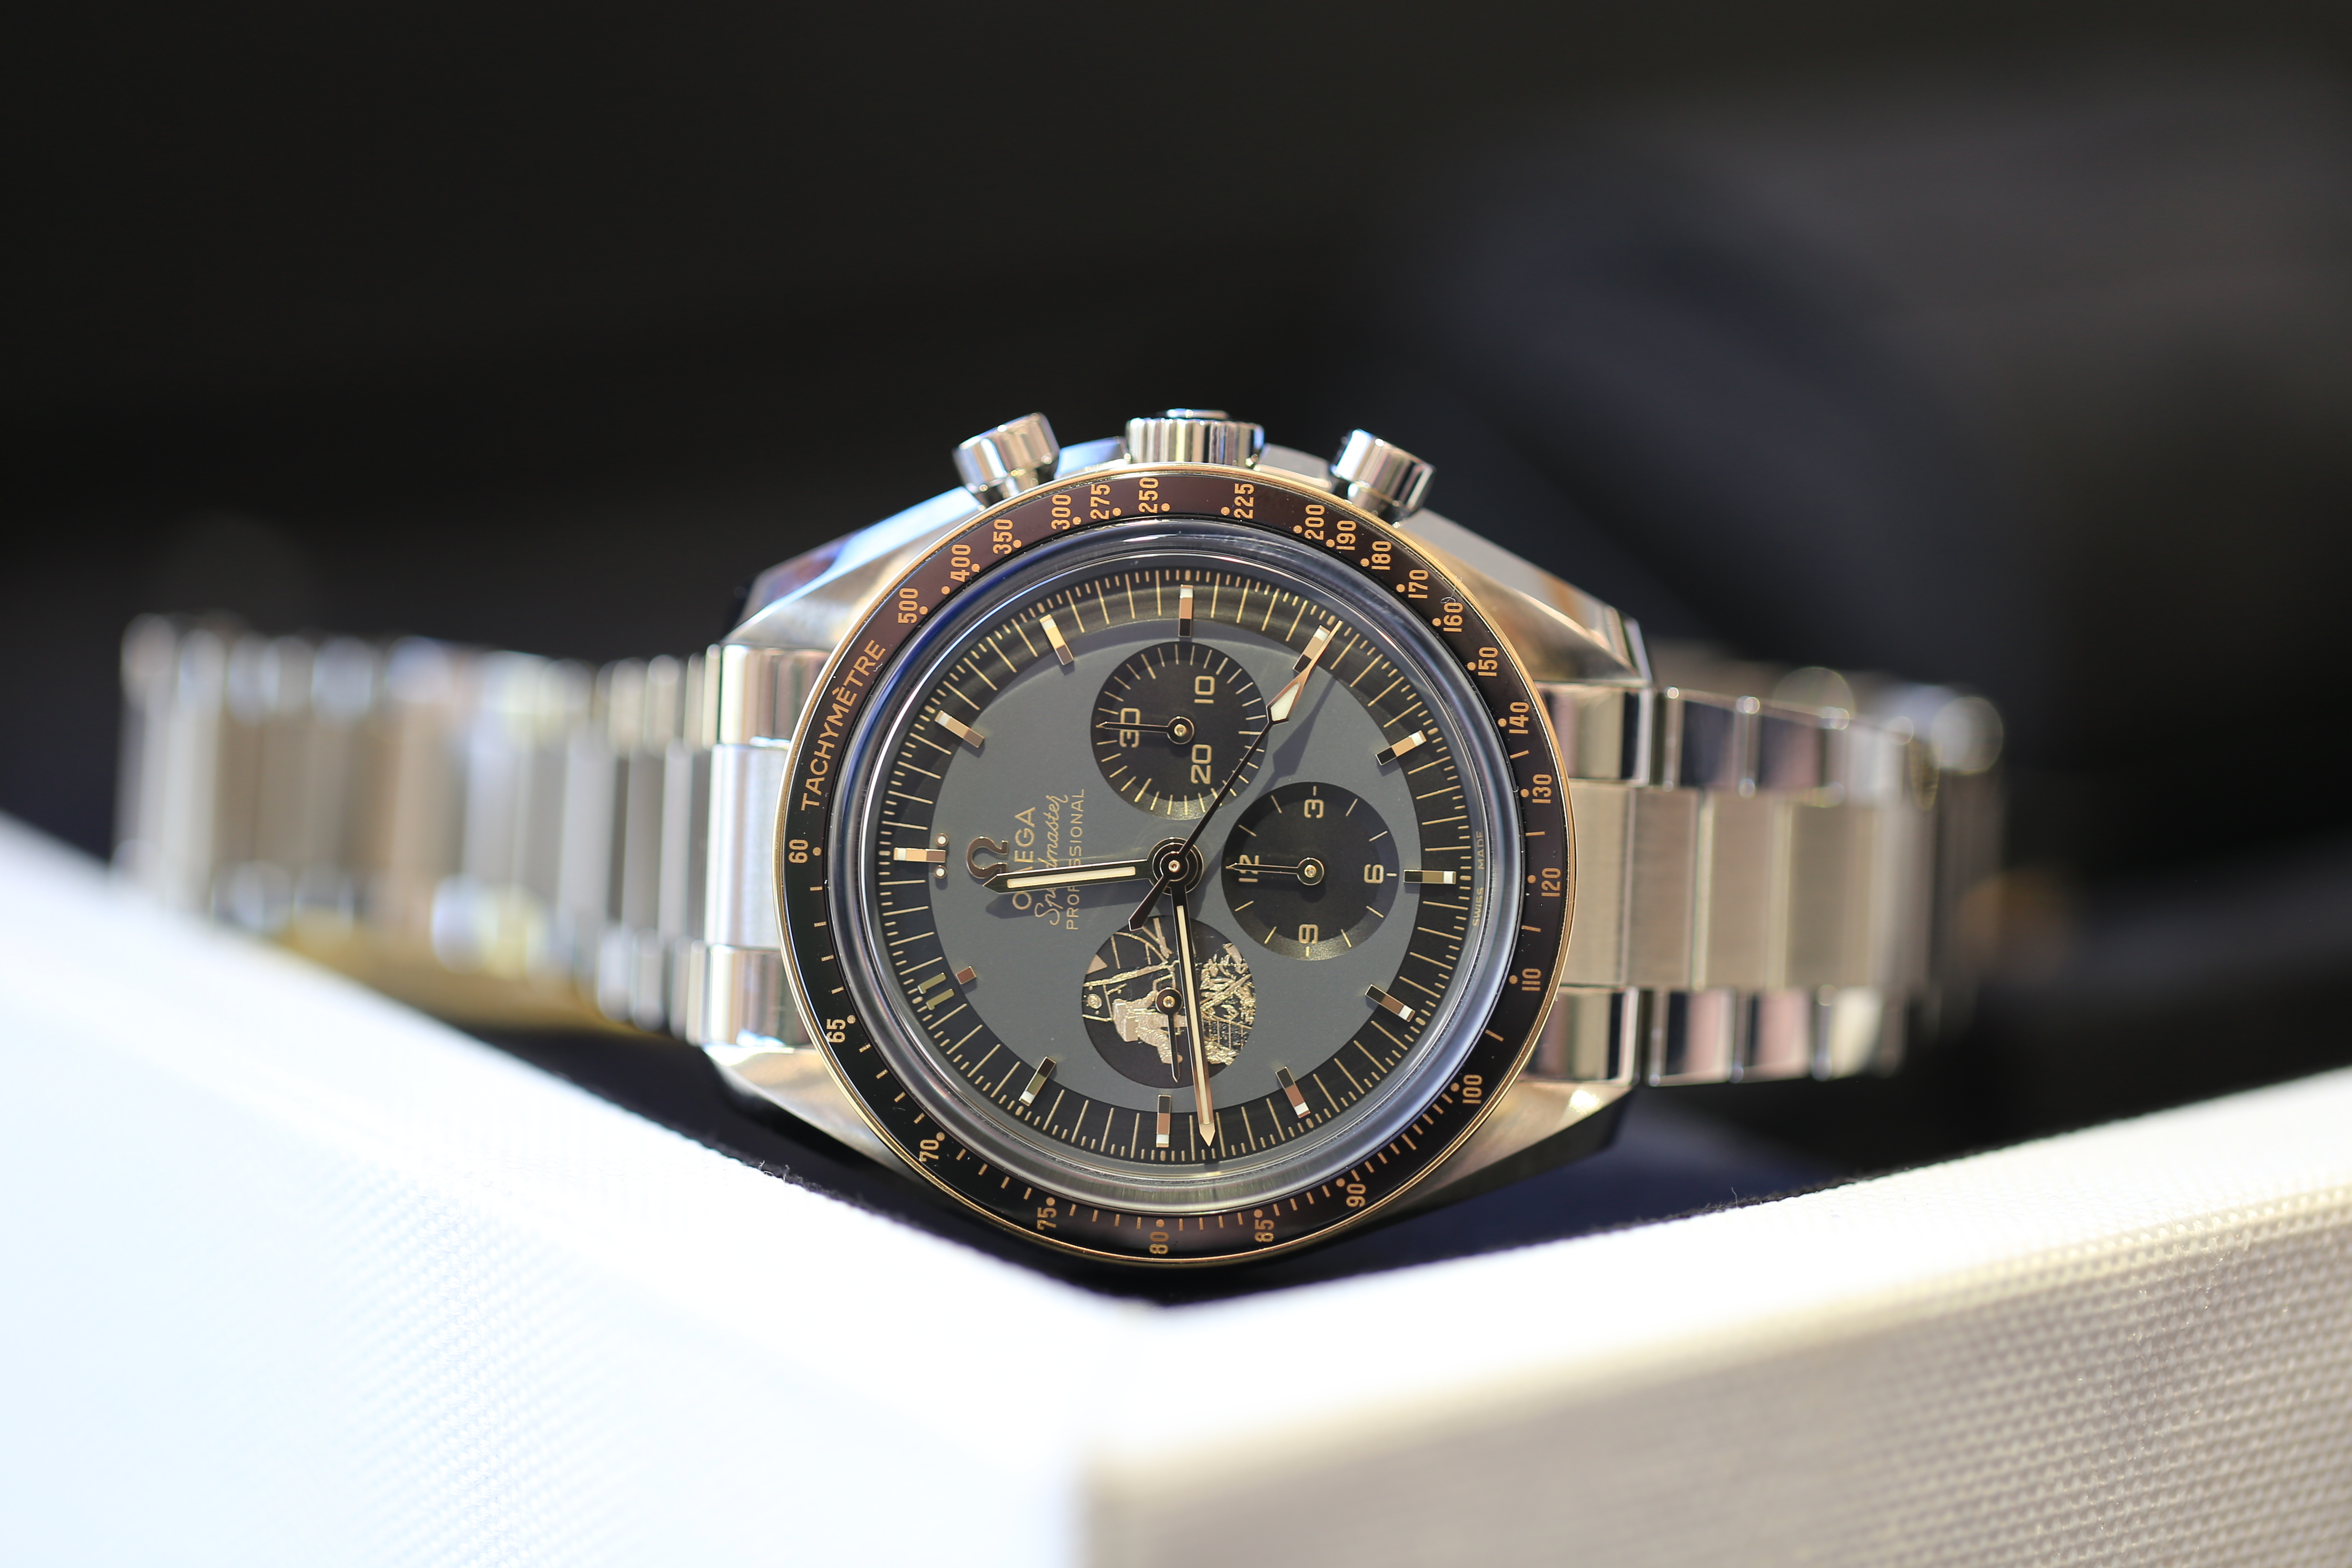 Prestatie land Electrificeren Swatch Group 2019 Release: The Omega Speedmaster Apollo 11 50th Anniversary  Limited Edition in Stainless Steel | WatchTime - USA's No.1 Watch Magazine